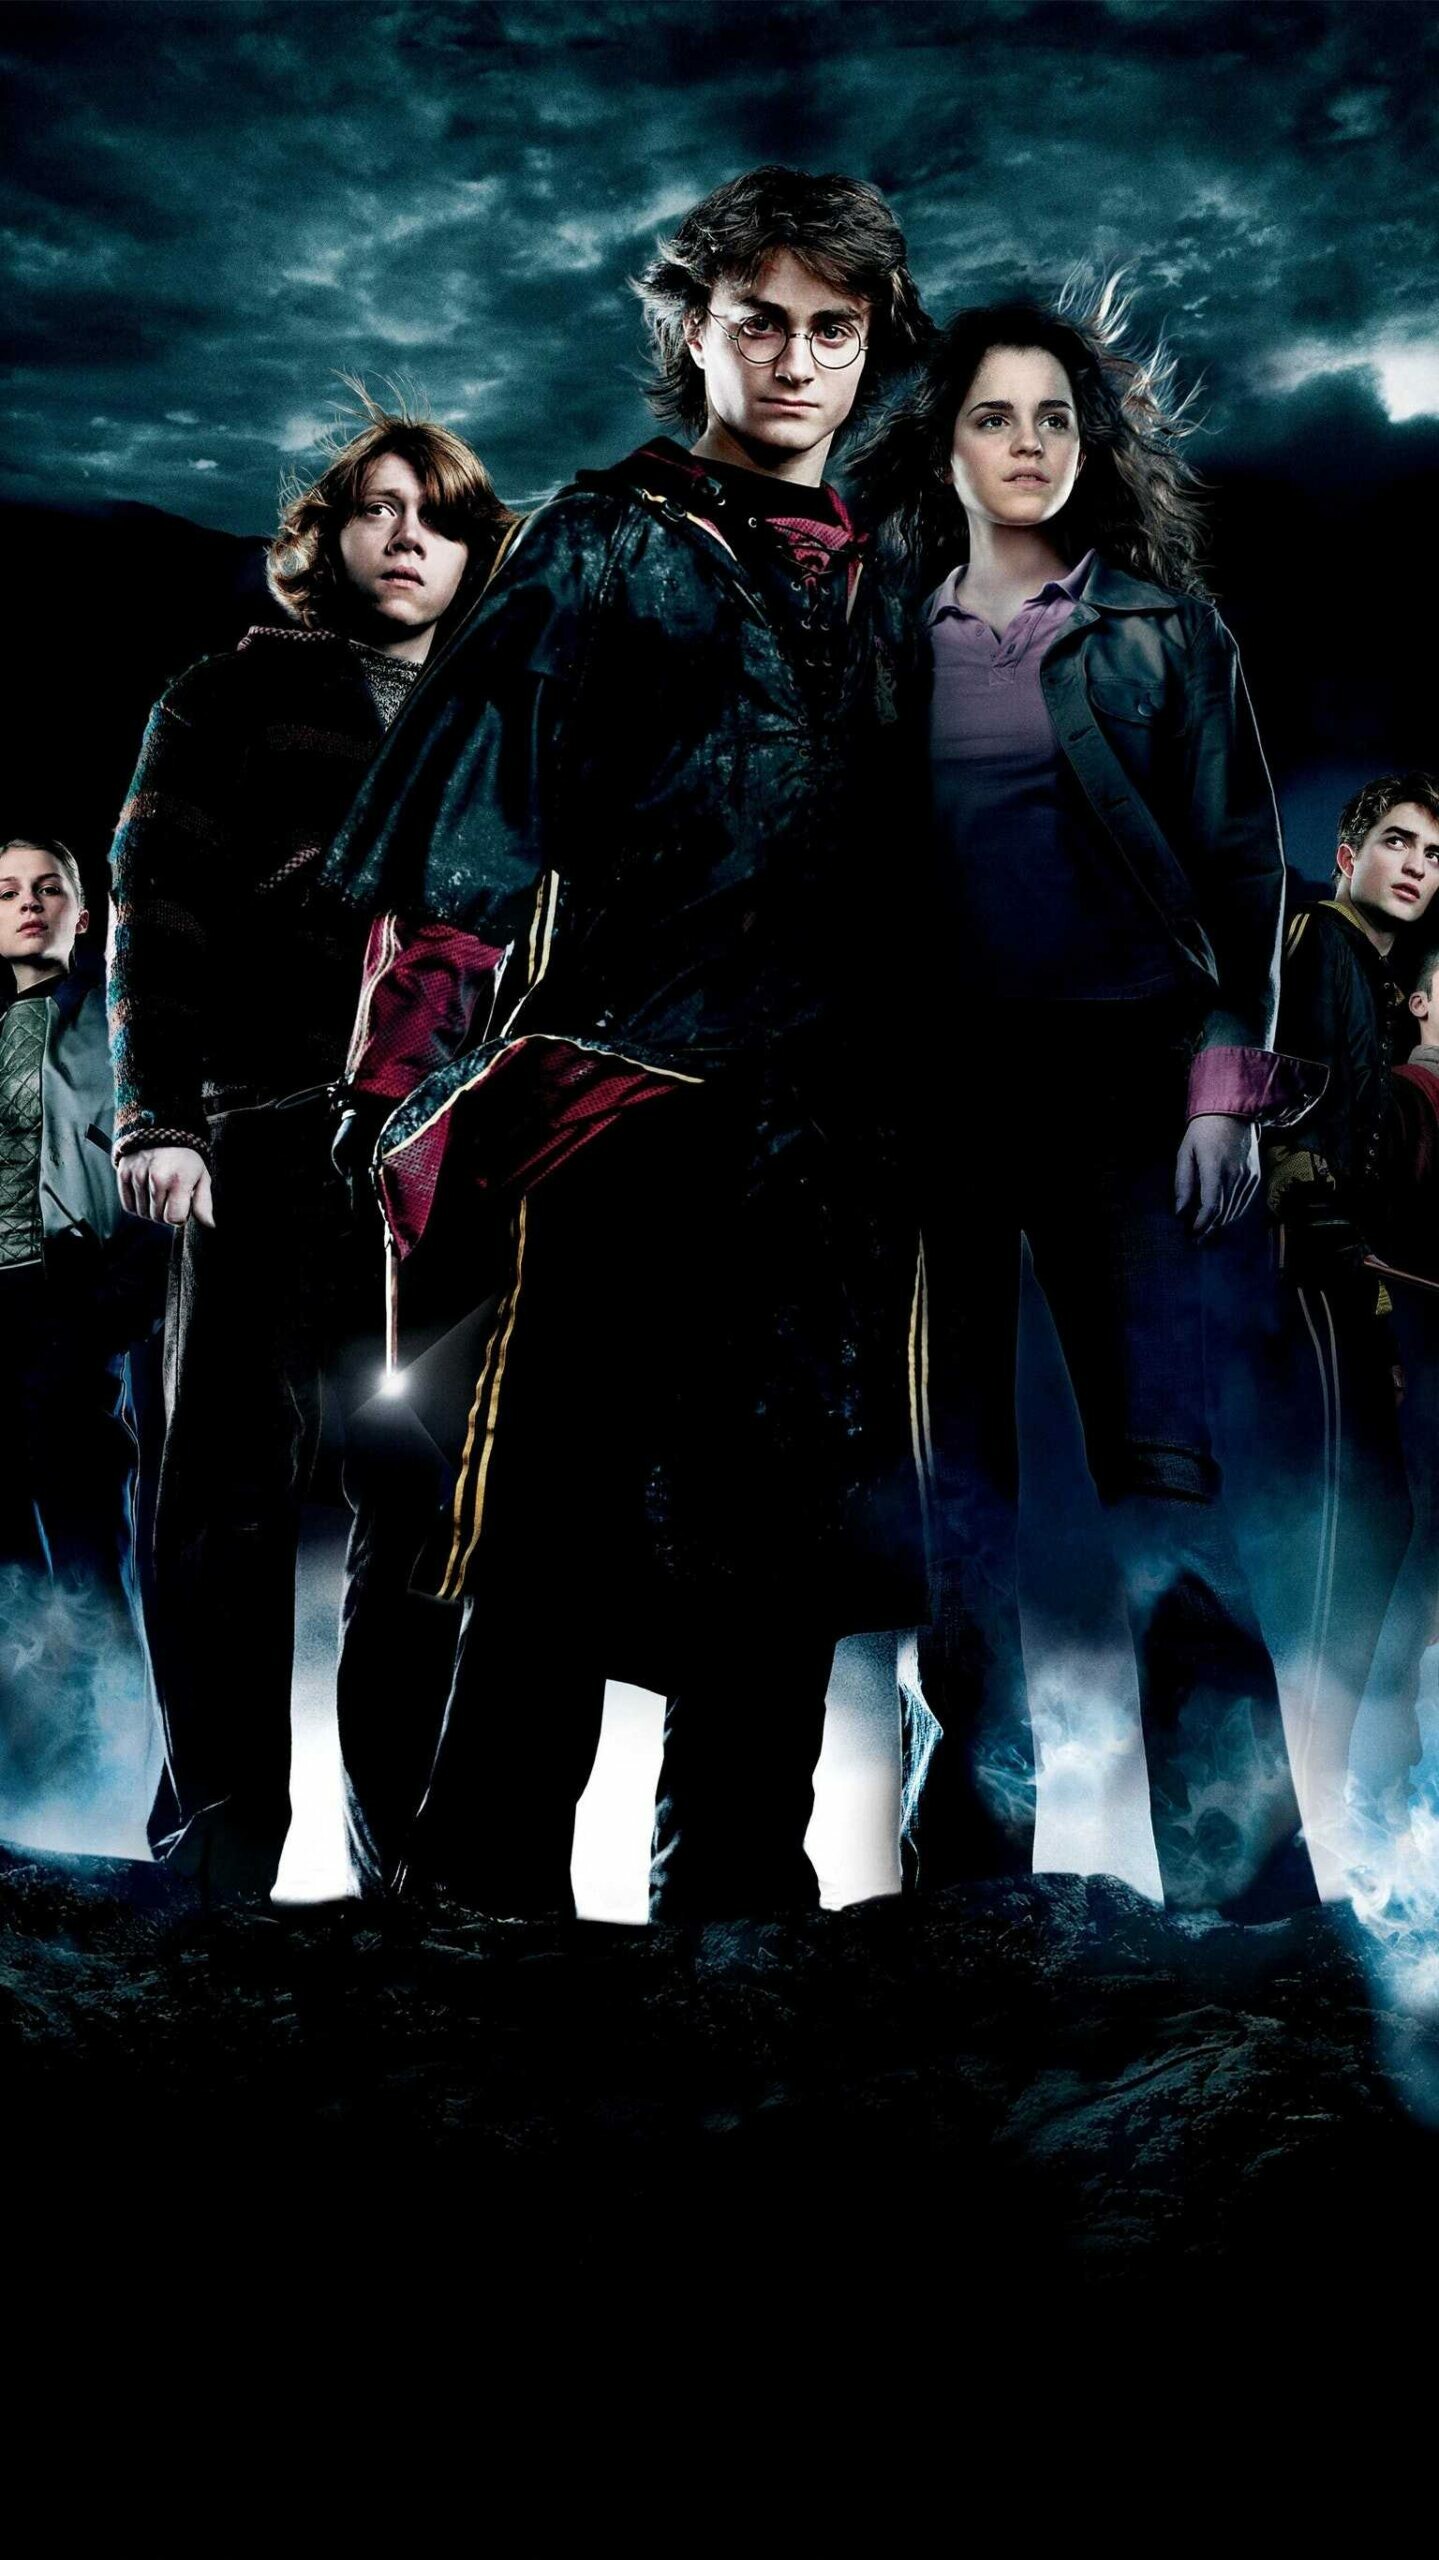 Harry Potter: The Goblet of Fire, A 2005 fantasy film directed by Mike Newell and distributed by Warner Bros. Pictures. 1440x2560 HD Wallpaper.